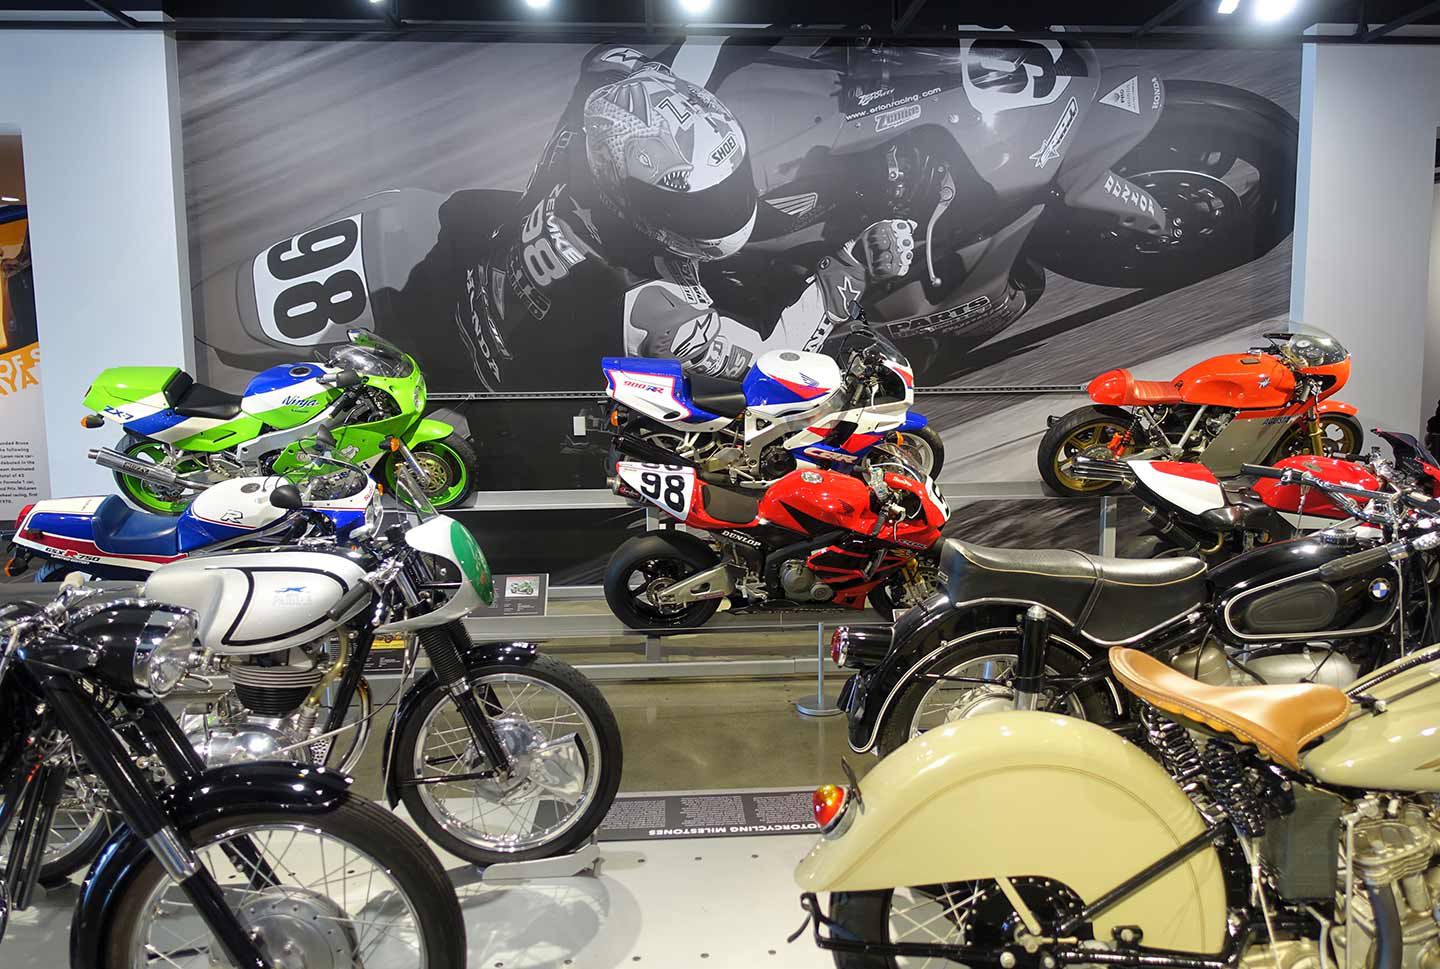 From old to new, the “Around the World” exhibit follows the evolution of motorcycles from their days as personal transportation to modern-day superbikes.